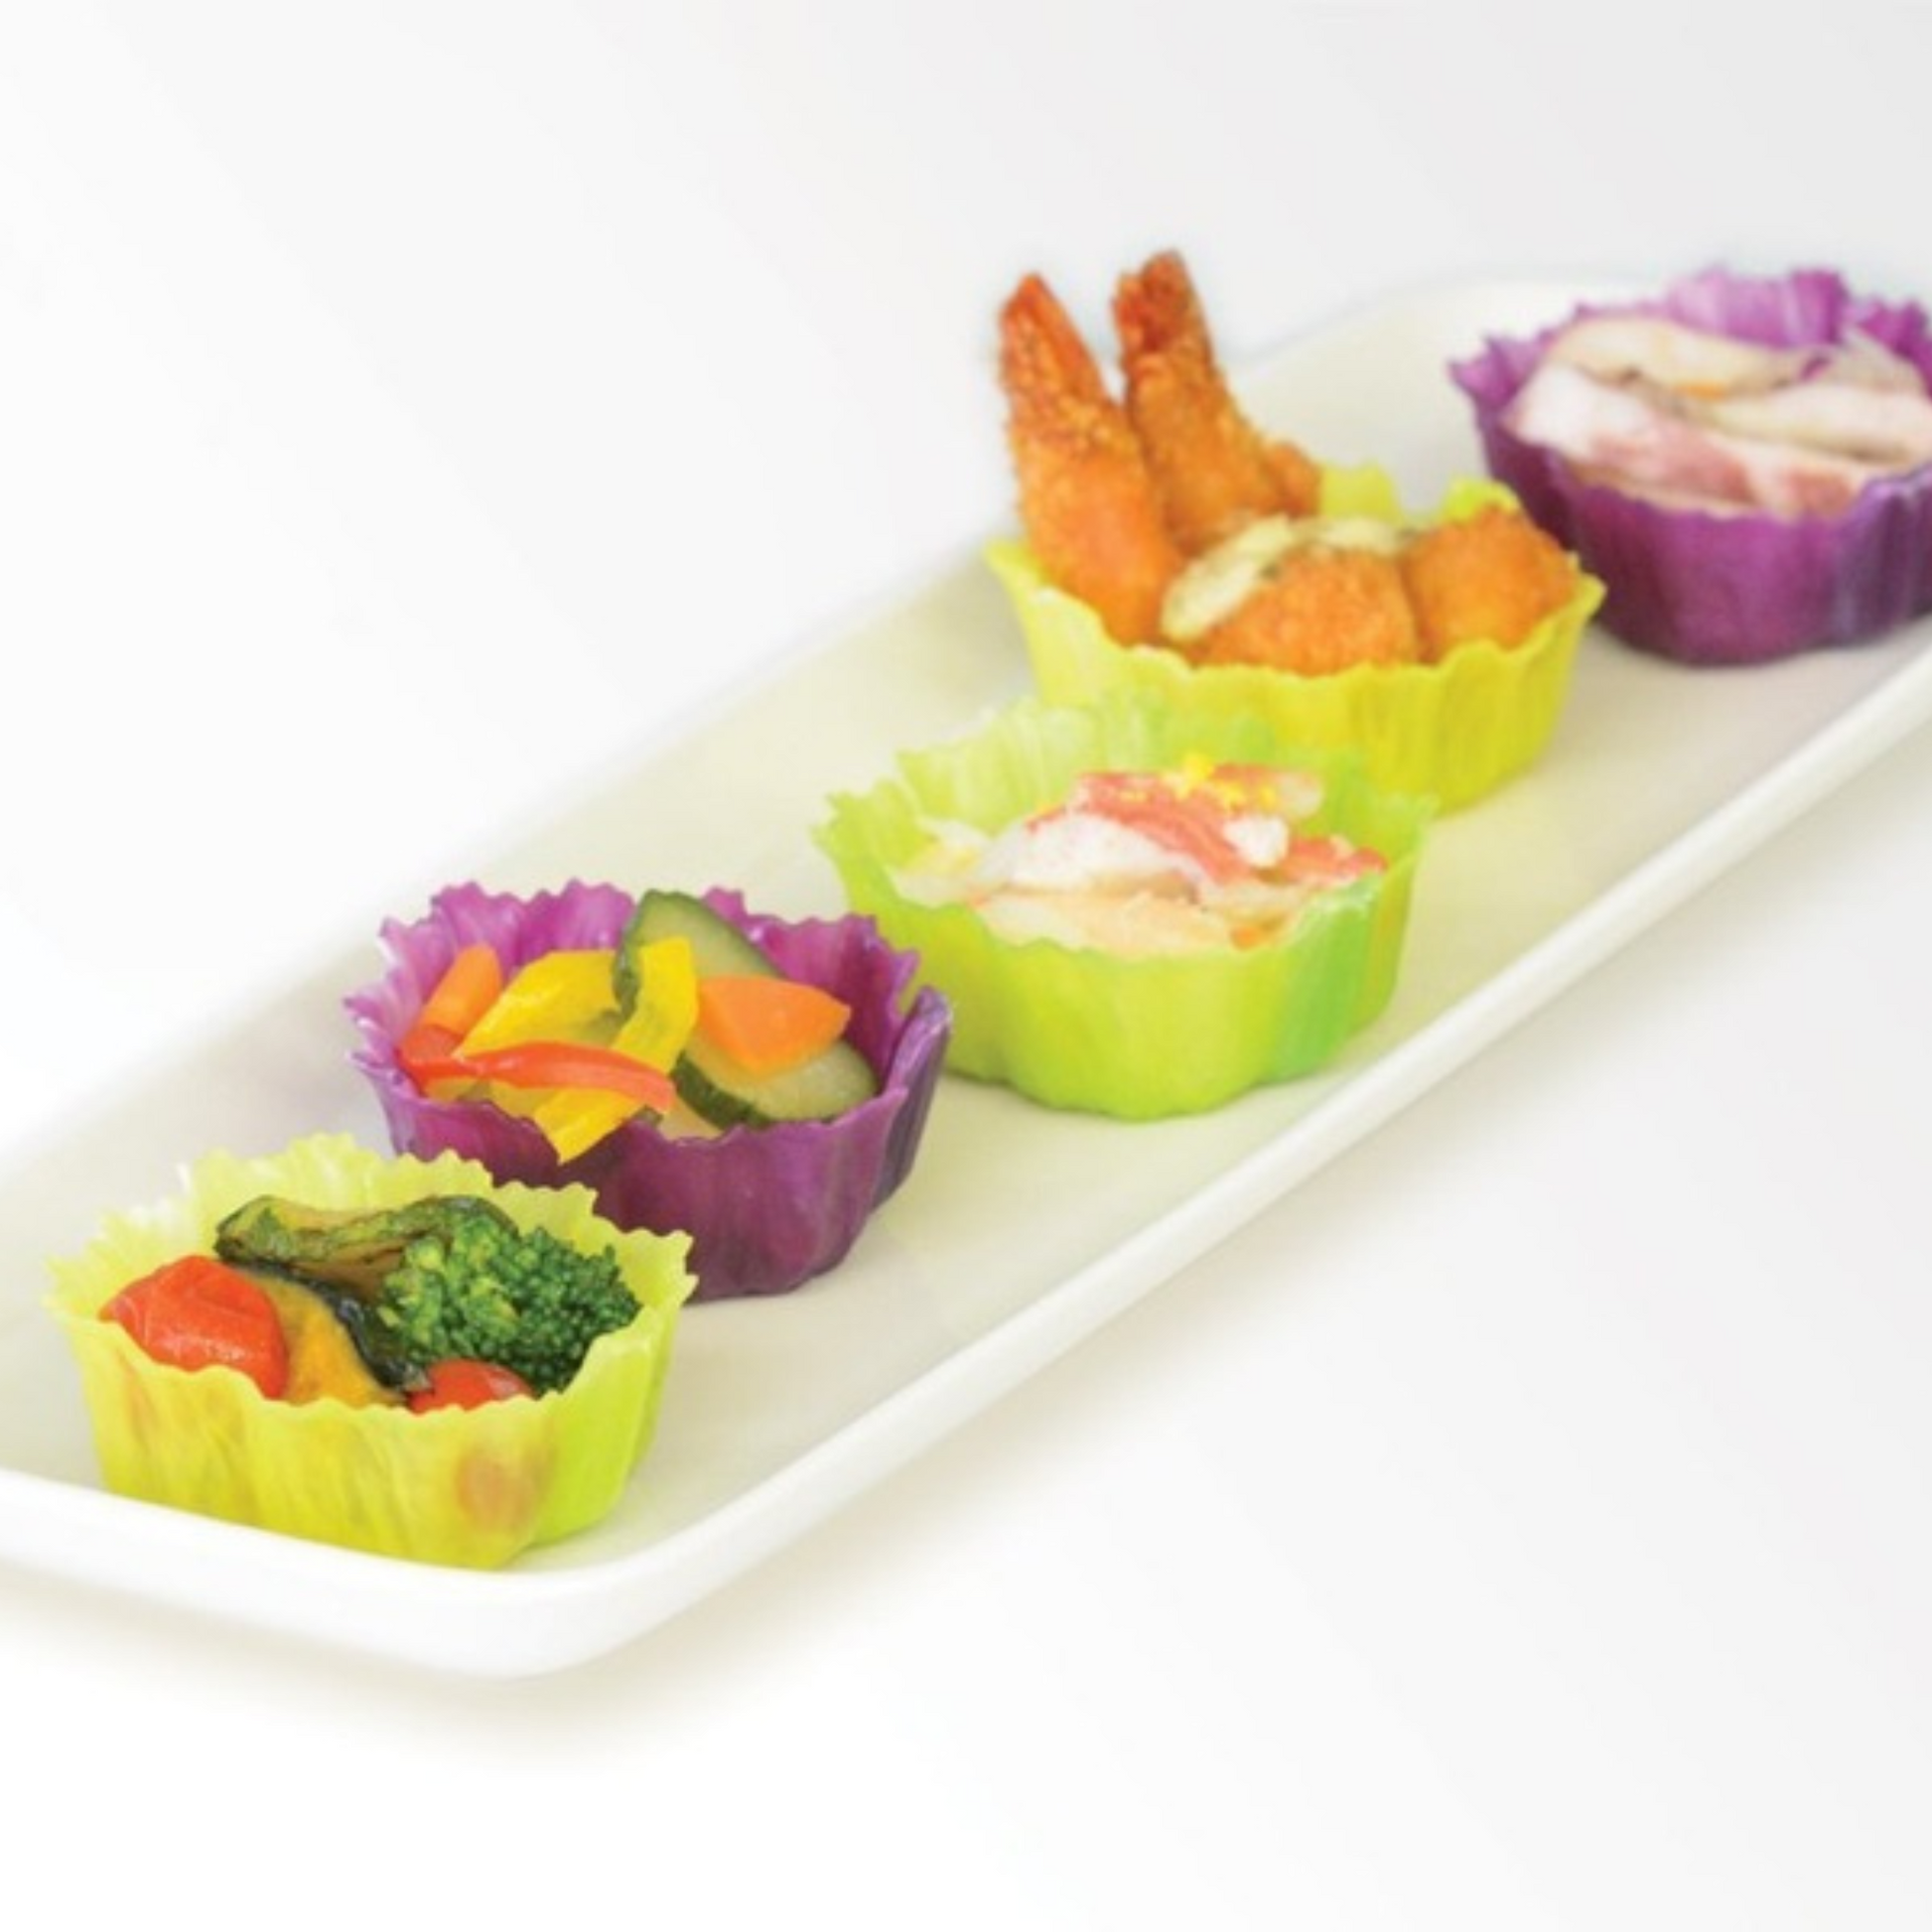 Organize your bento with cups and dividers – Bento&co